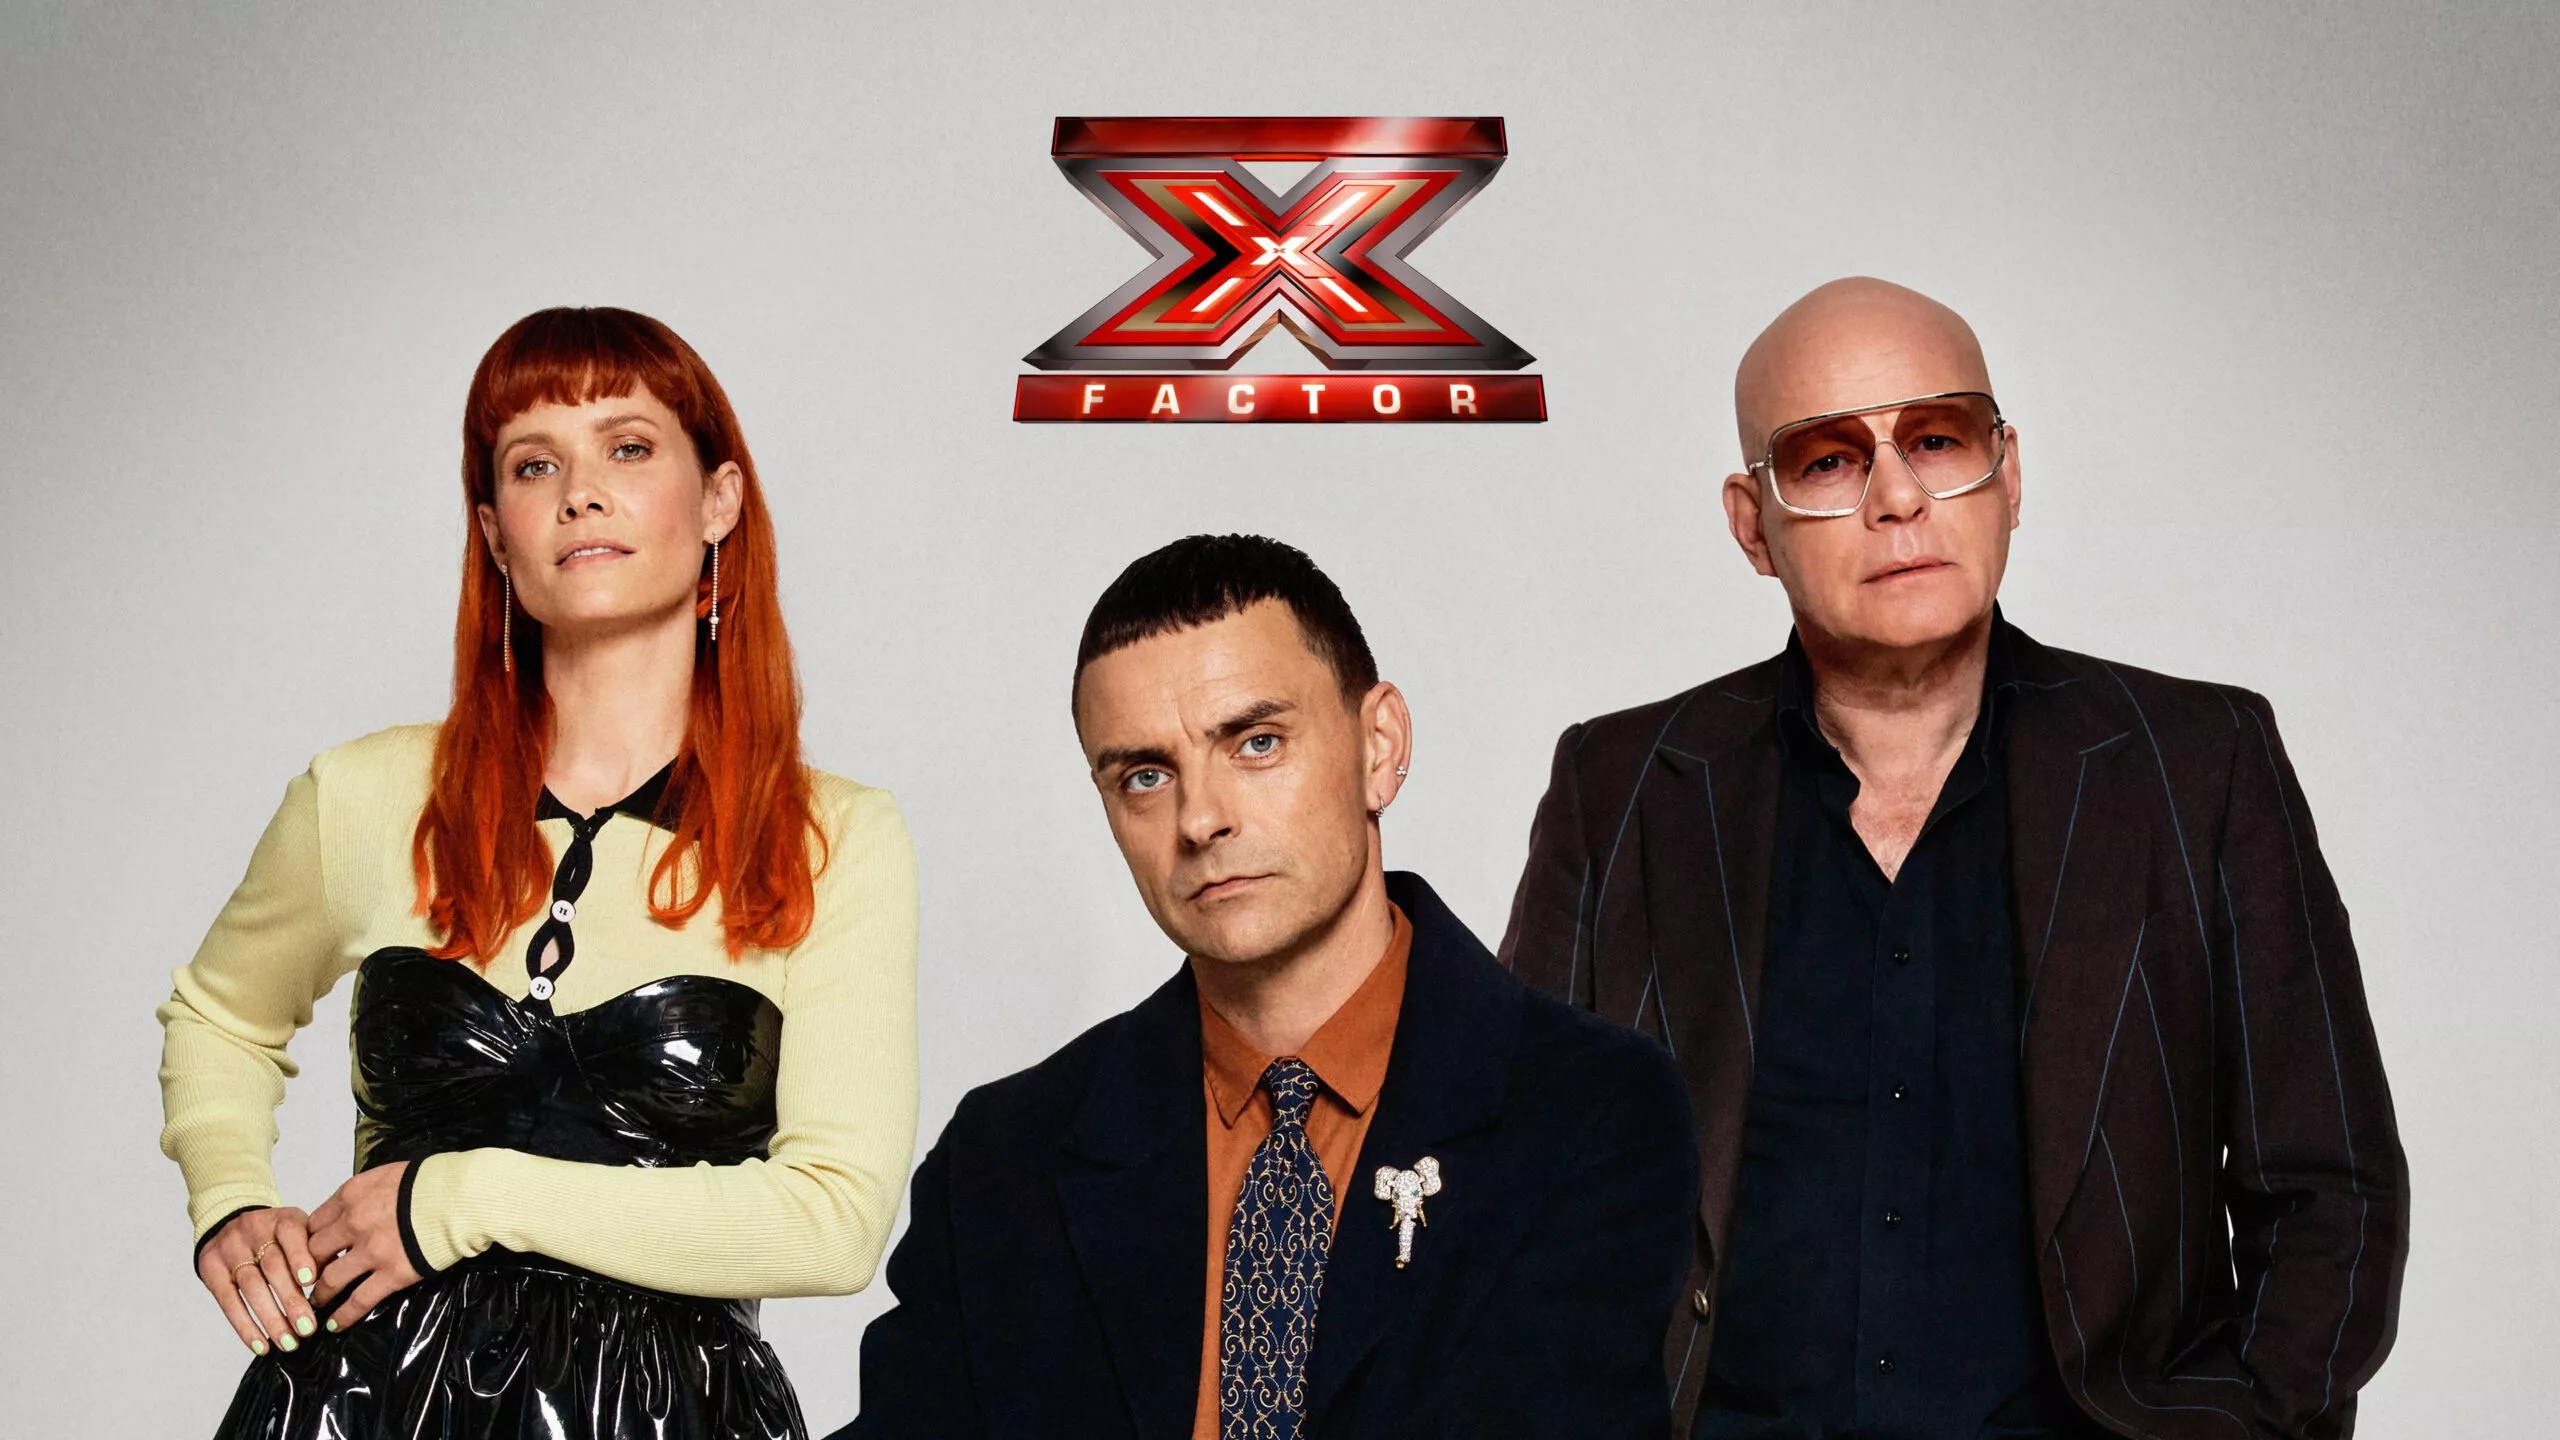 X Factor – Live TV 2 Play